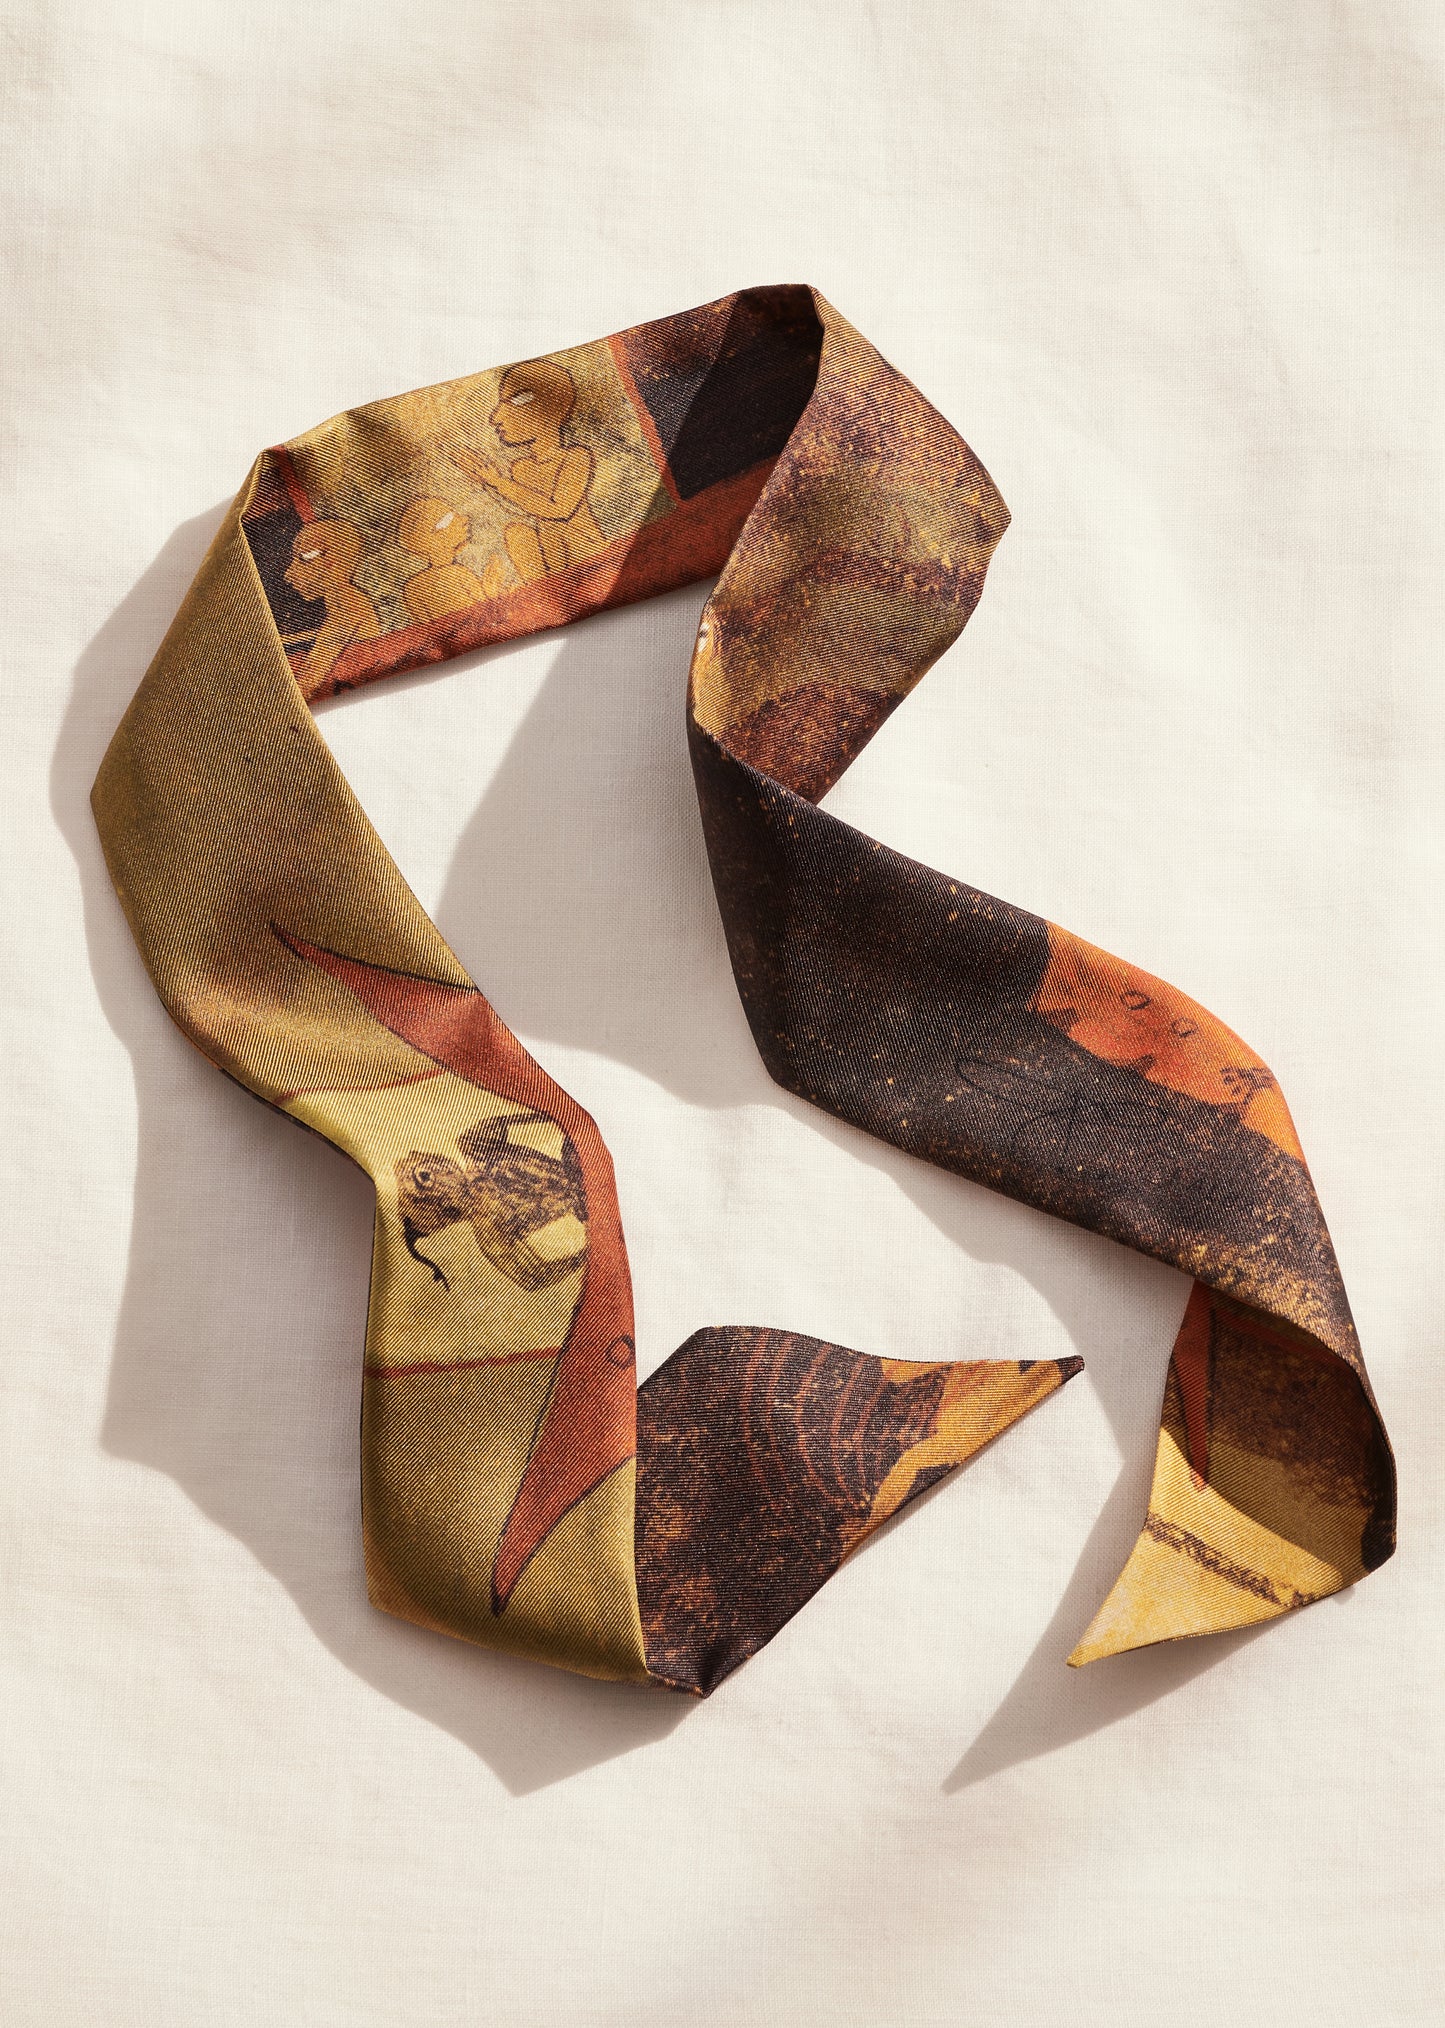  section of artist Babuji Rajendra Shilpi’s surrealist gouache painting on a silk twilly scarf